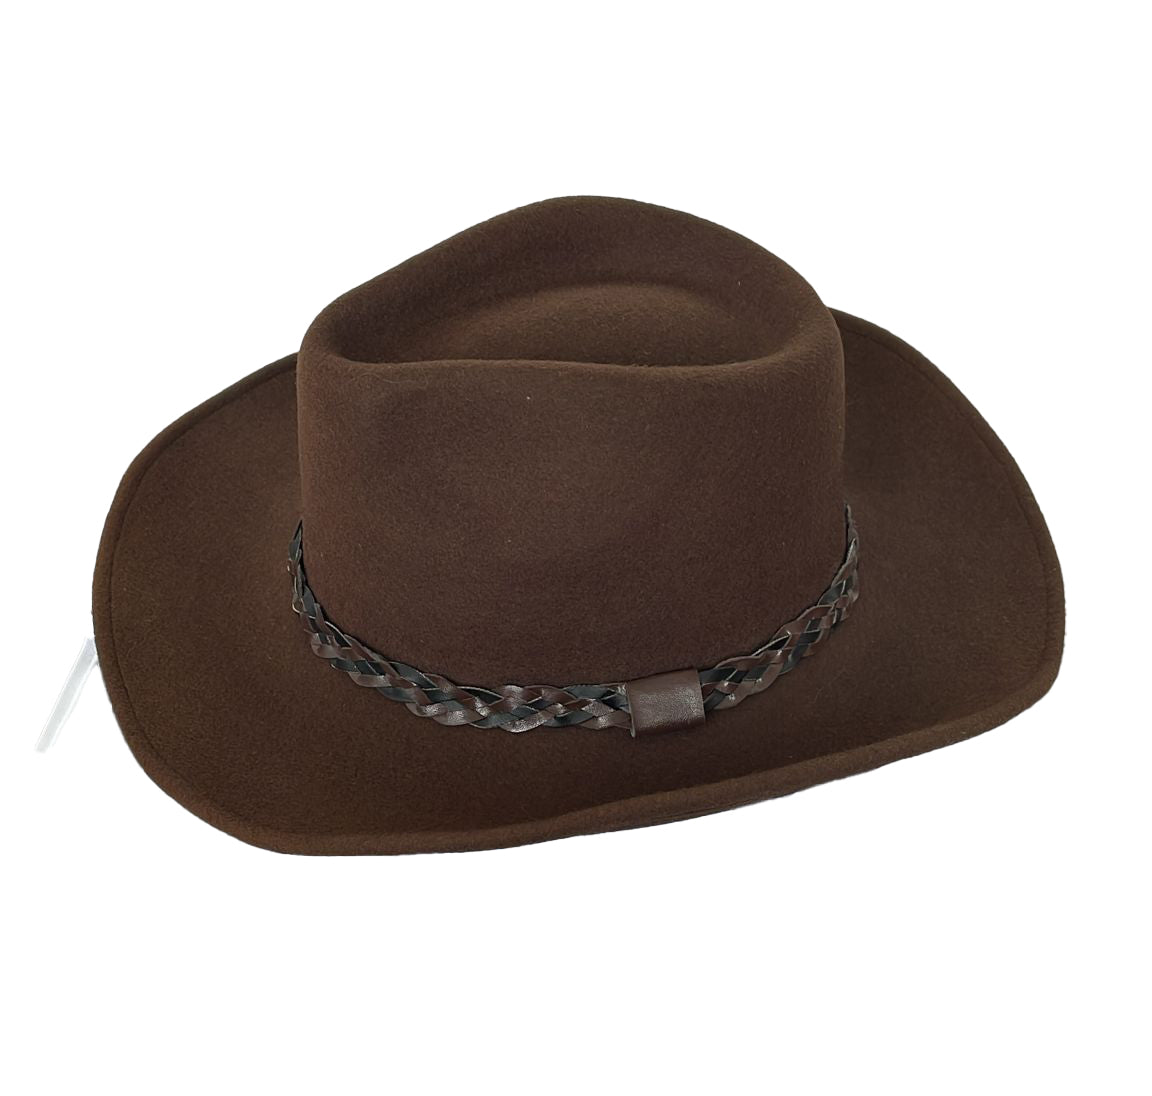 Crumplative wool felt hat for women and men with brass buckle | Size 56-57 cm